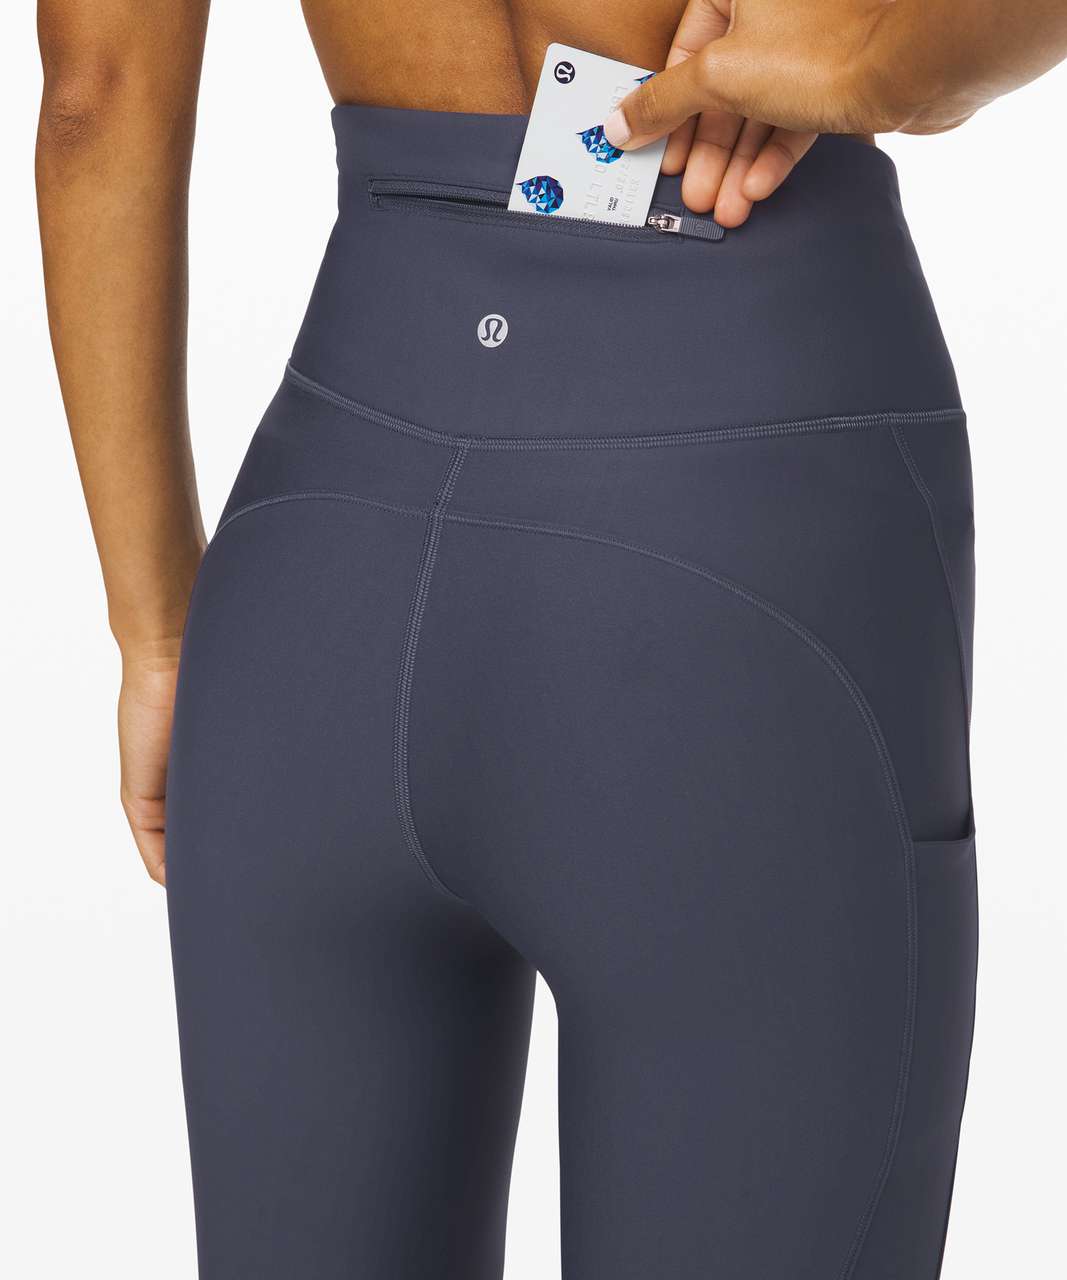 Lululemon Flurry Up Fleece Lined Super High-Rise Tight Leggings Women's 2  NEW - $96 New With Tags - From Aggie